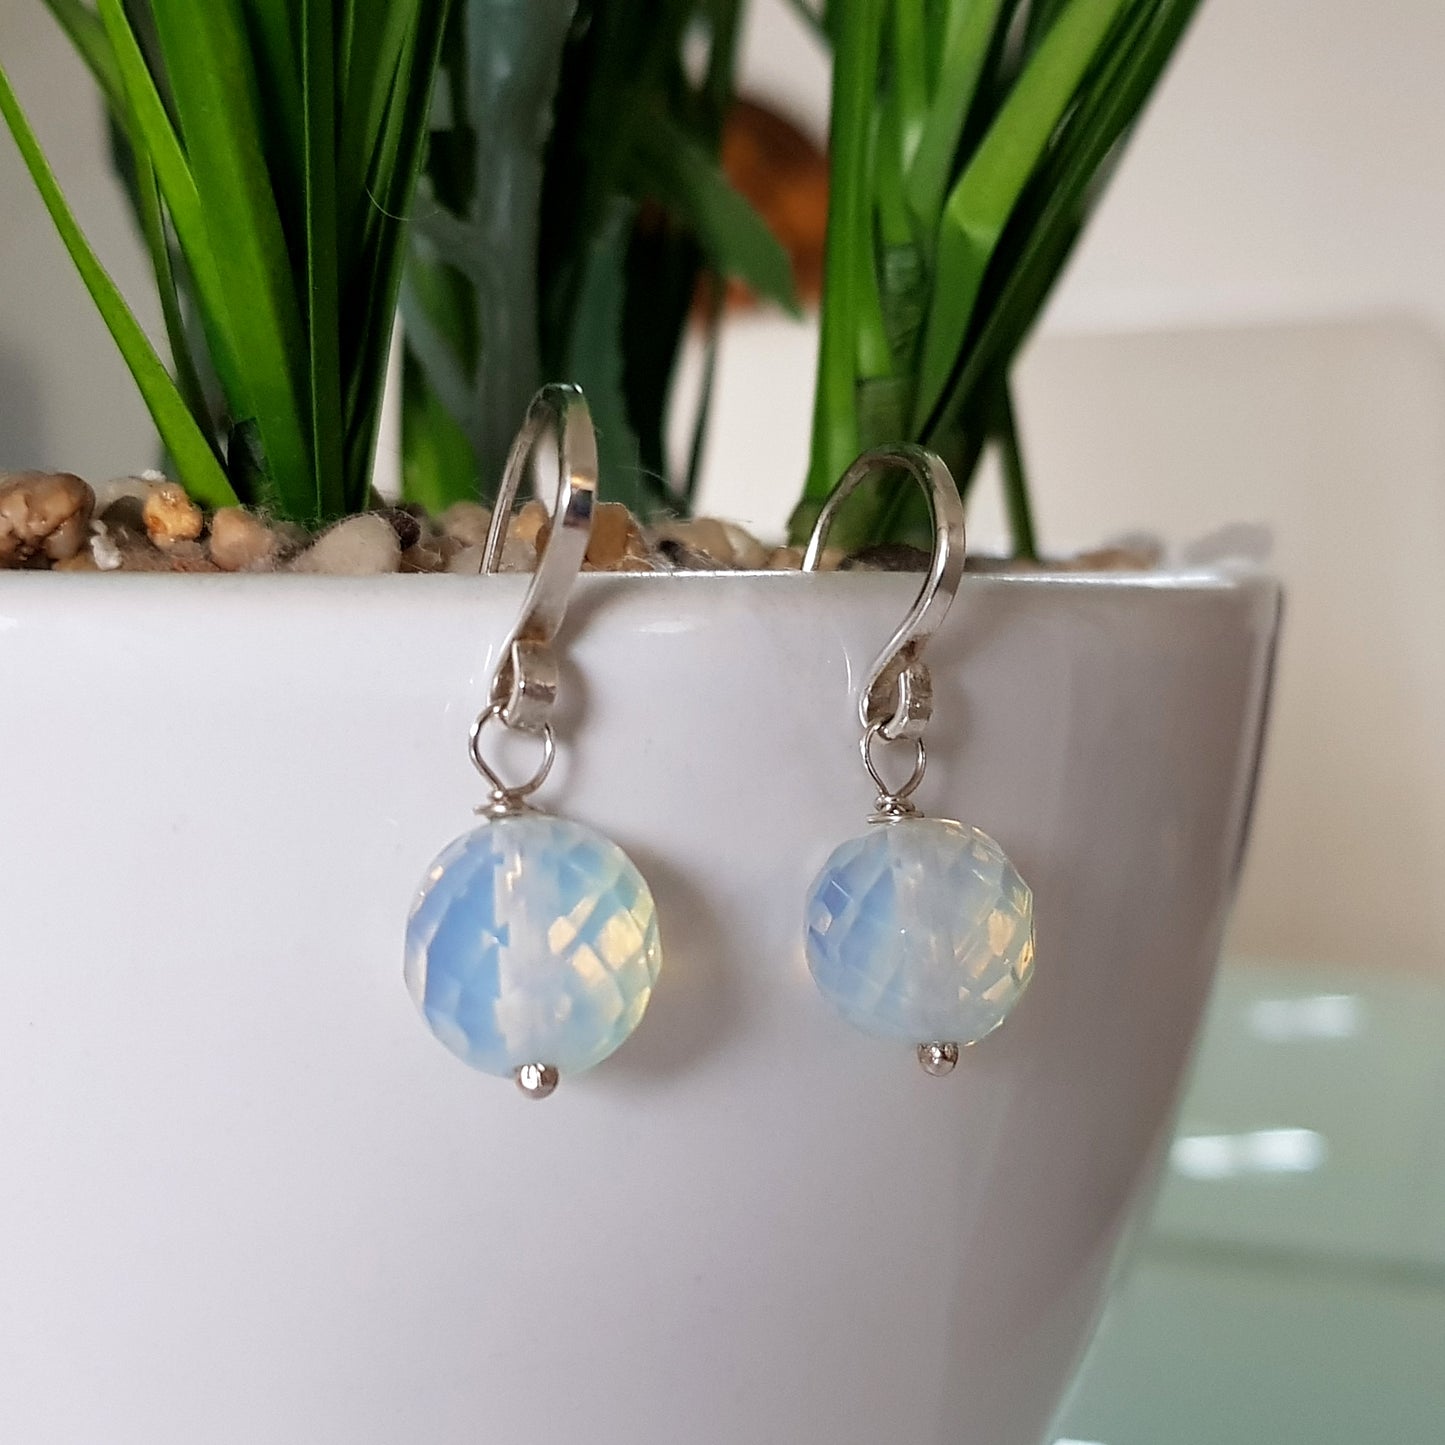 Solid sterling silver 925 with Jelly Opal sphere dangles | Kalitheo Jewellery